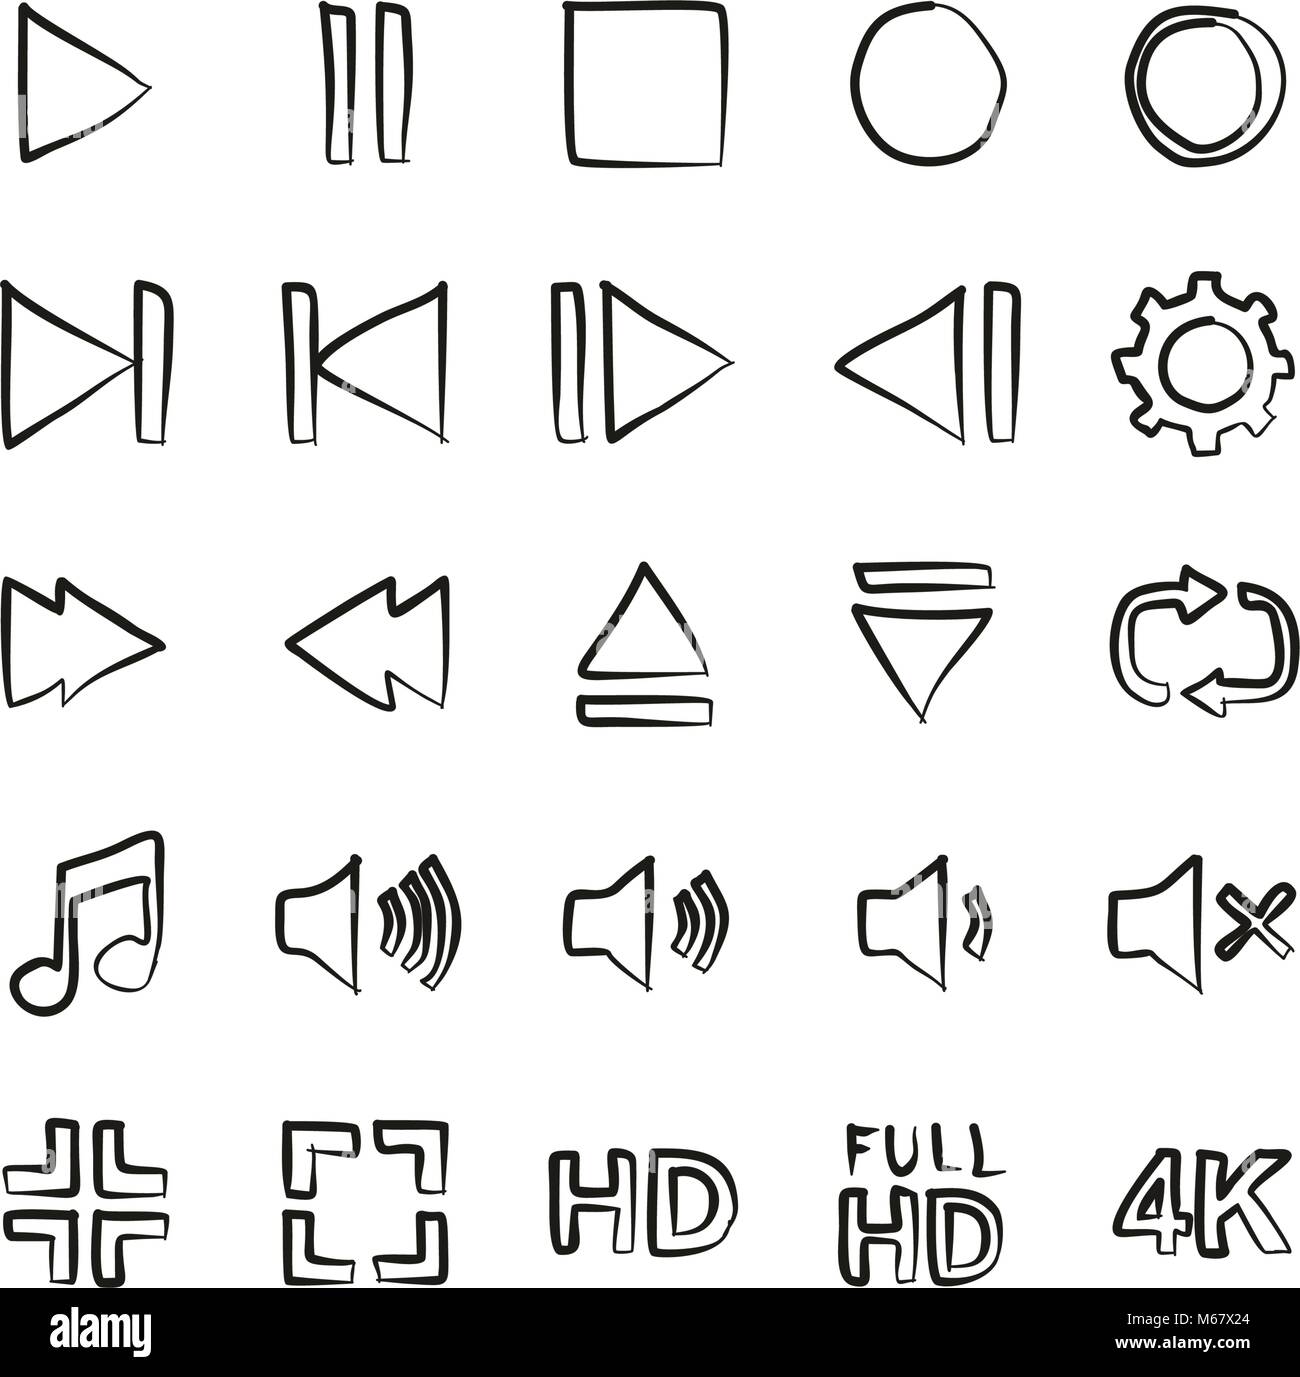 Video Or Music Or Camera Button Icons Freehand Stock Vector